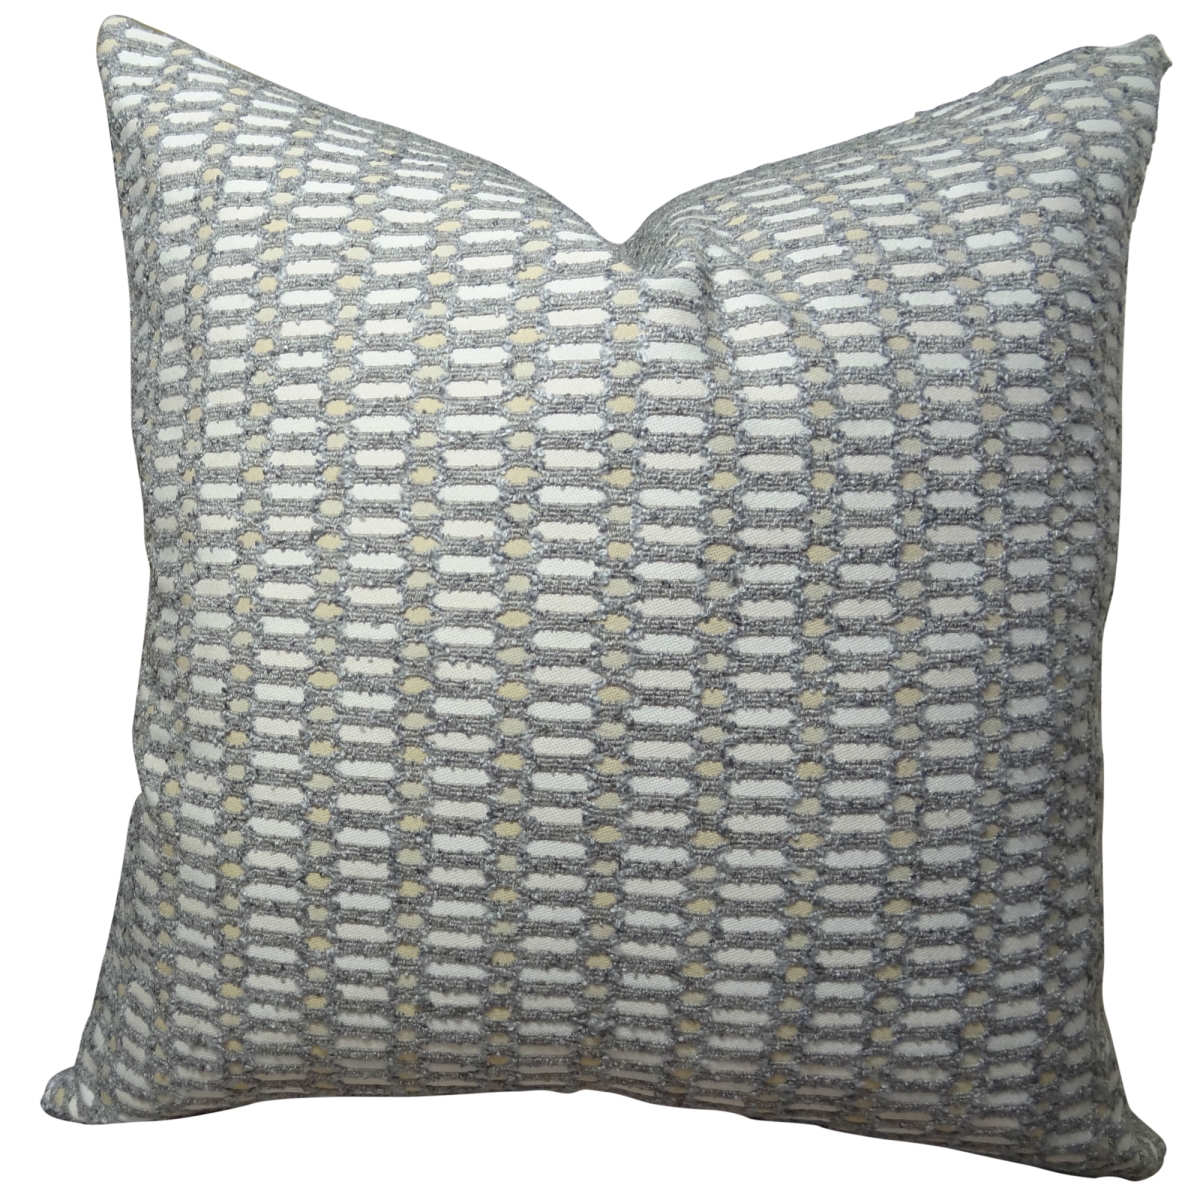 Plutus PB11223-2036-DP 20 x 36 in. Double Sided King Size Circle Joiners Handmade Throw Pillow - Gray & Cream